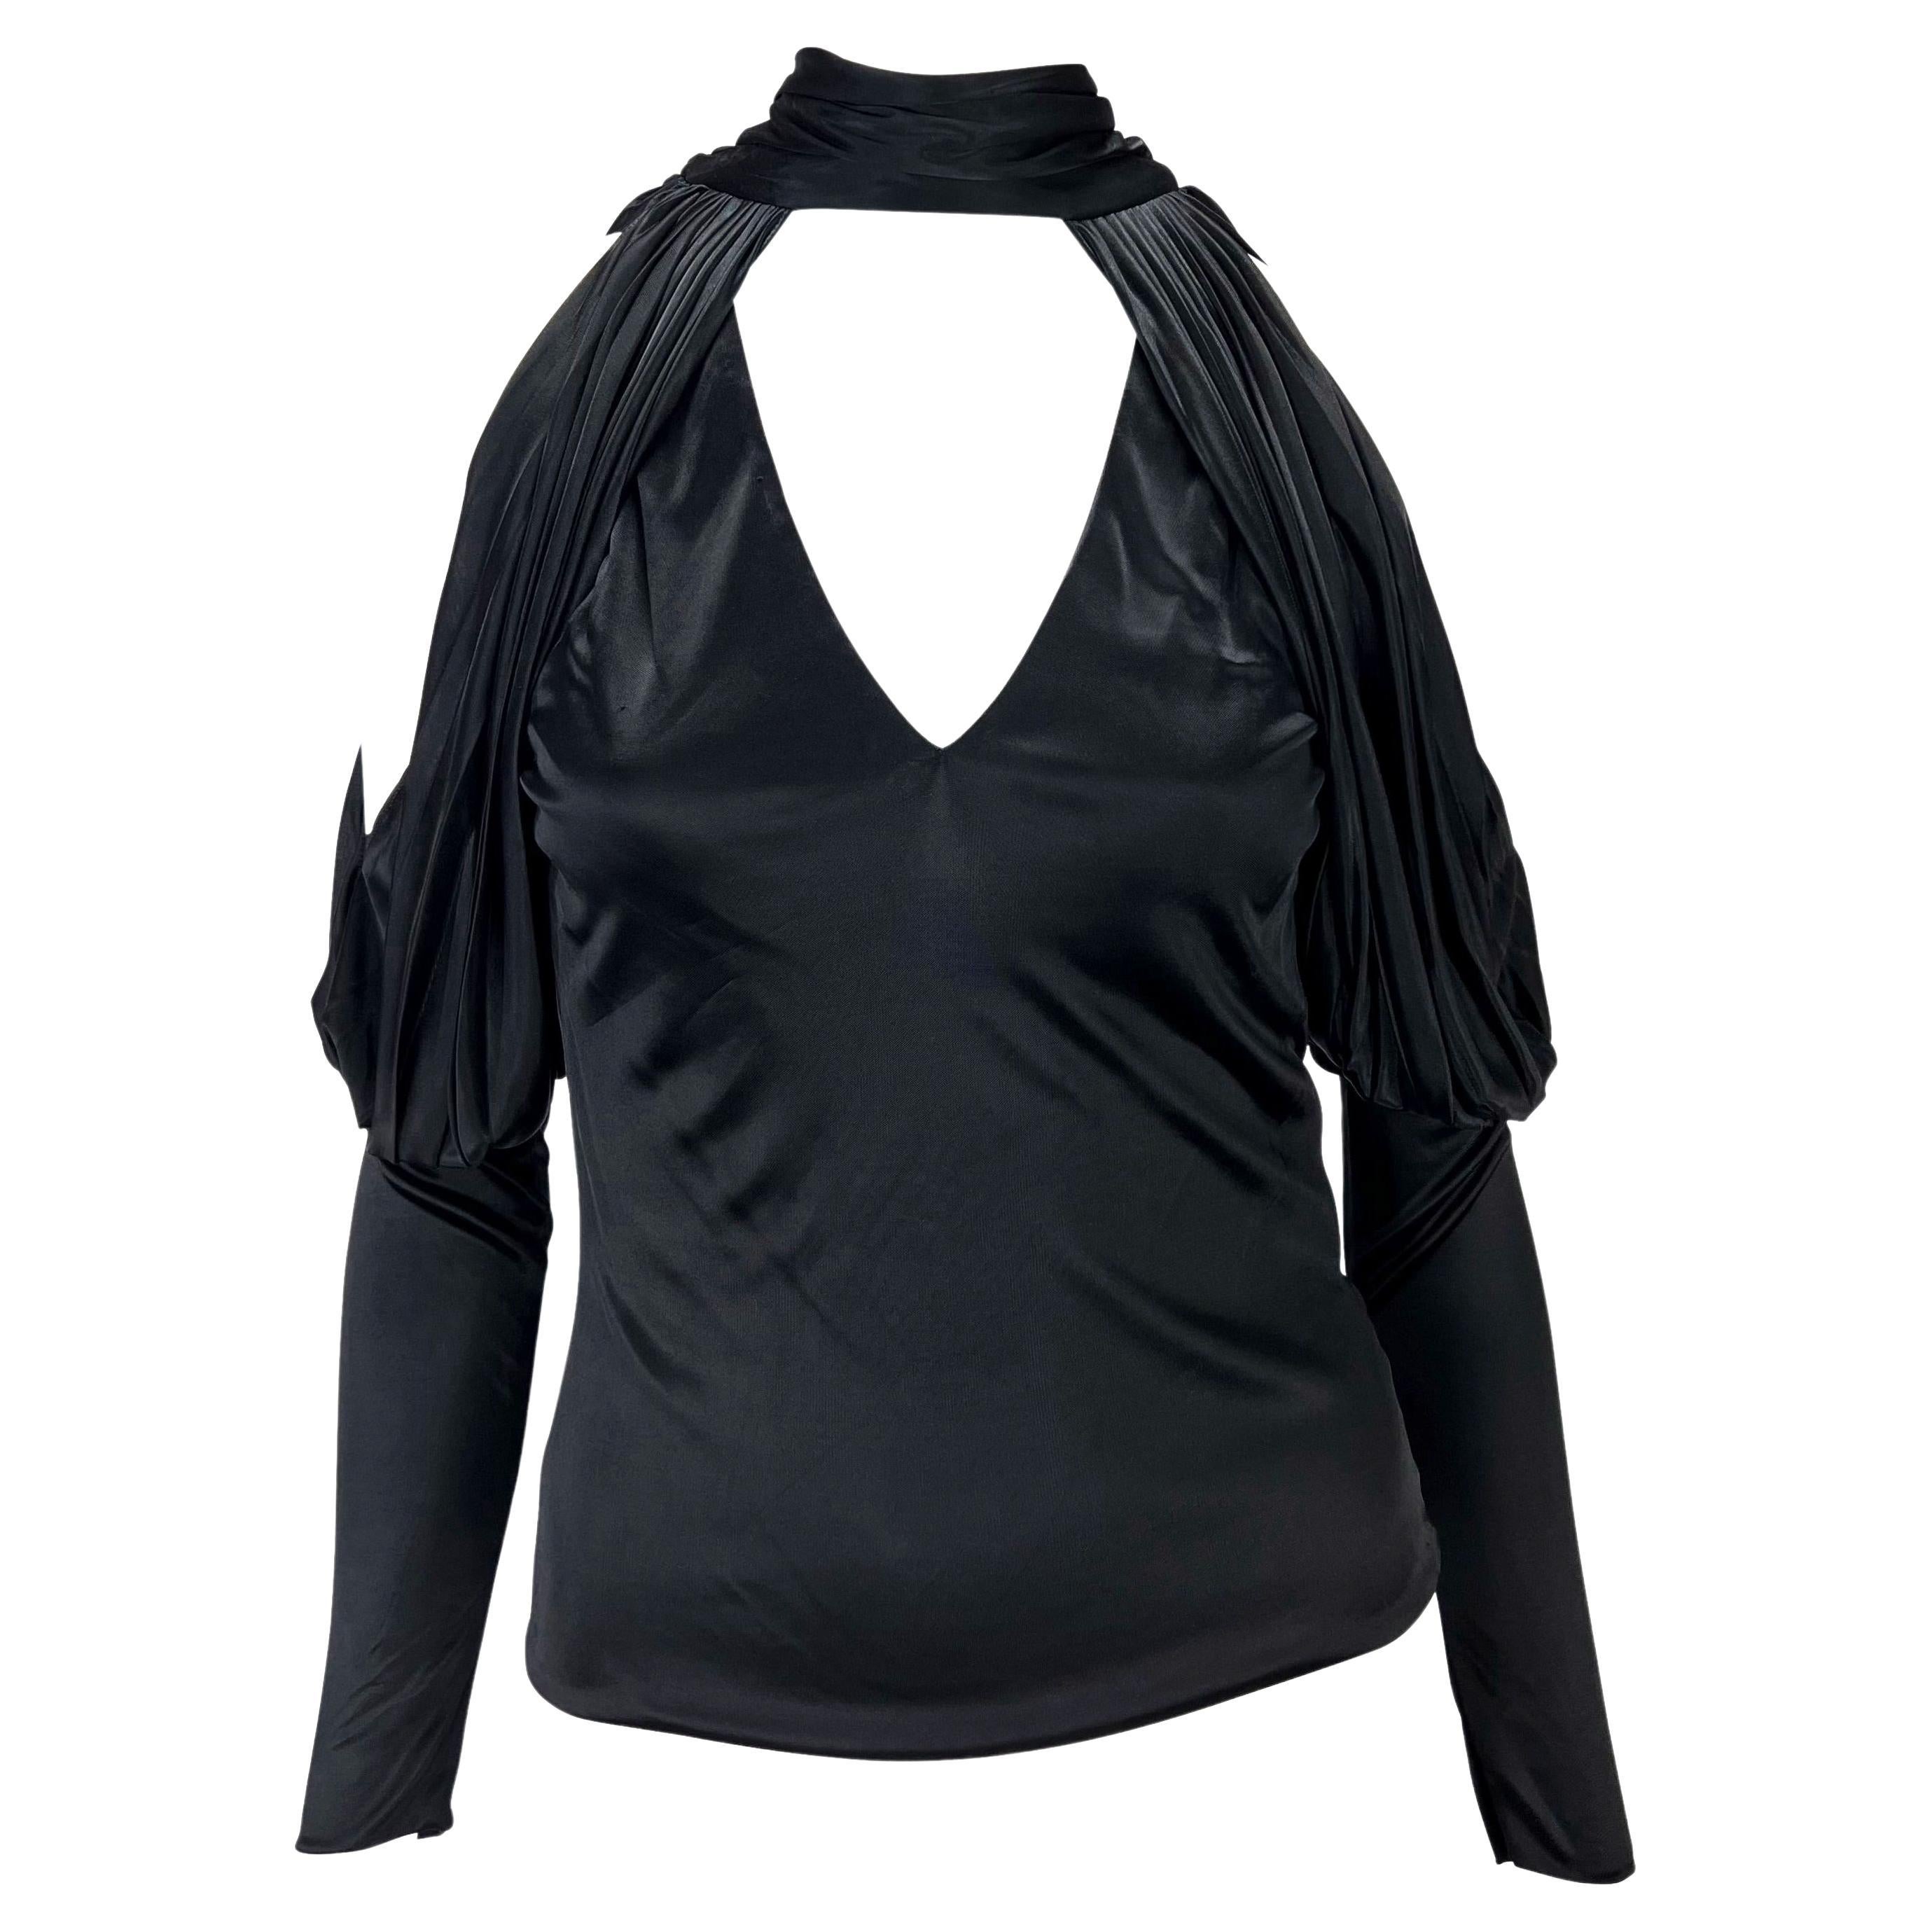 TheRealList presents: an incredible silky viscose black Gucci top, designed by Tom Ford. From the Fall/Winter 2003 collection, this ultra sexy top features a deep v-neckline, exposed back, and exposed shoulders. This rare and masterfully designed